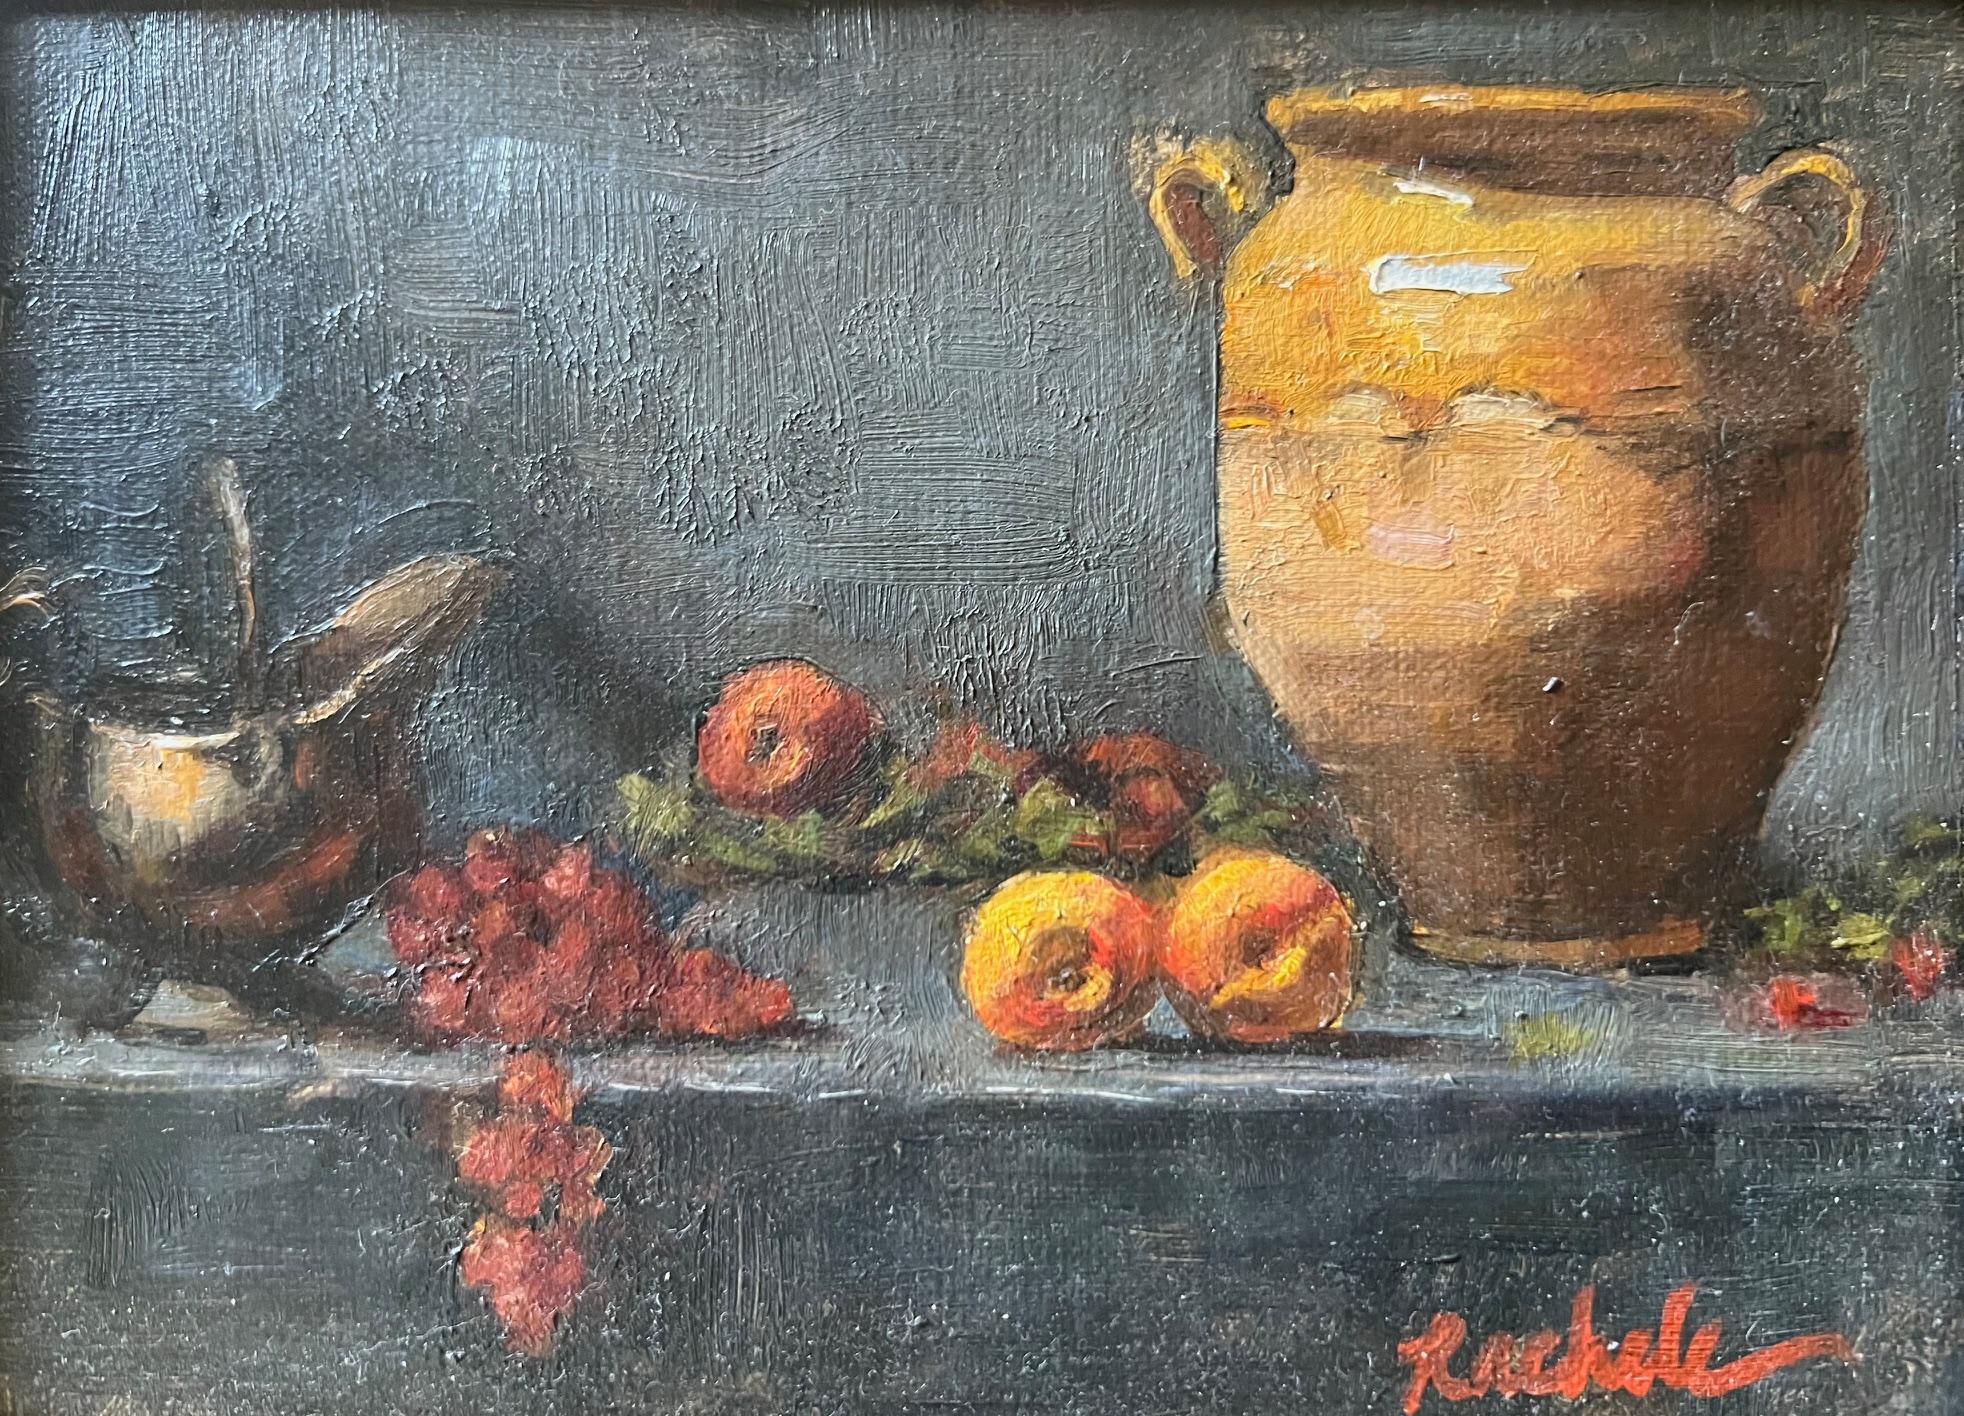 21st Century still life oil painting by Rachele Nyssen. Nicely framed and ready to hang.

Painting measures 8 x 6

Rachele Nyssen  trained and studied in the Classical Realist tradition, focusing on the genre of Still Life. Inspired by the